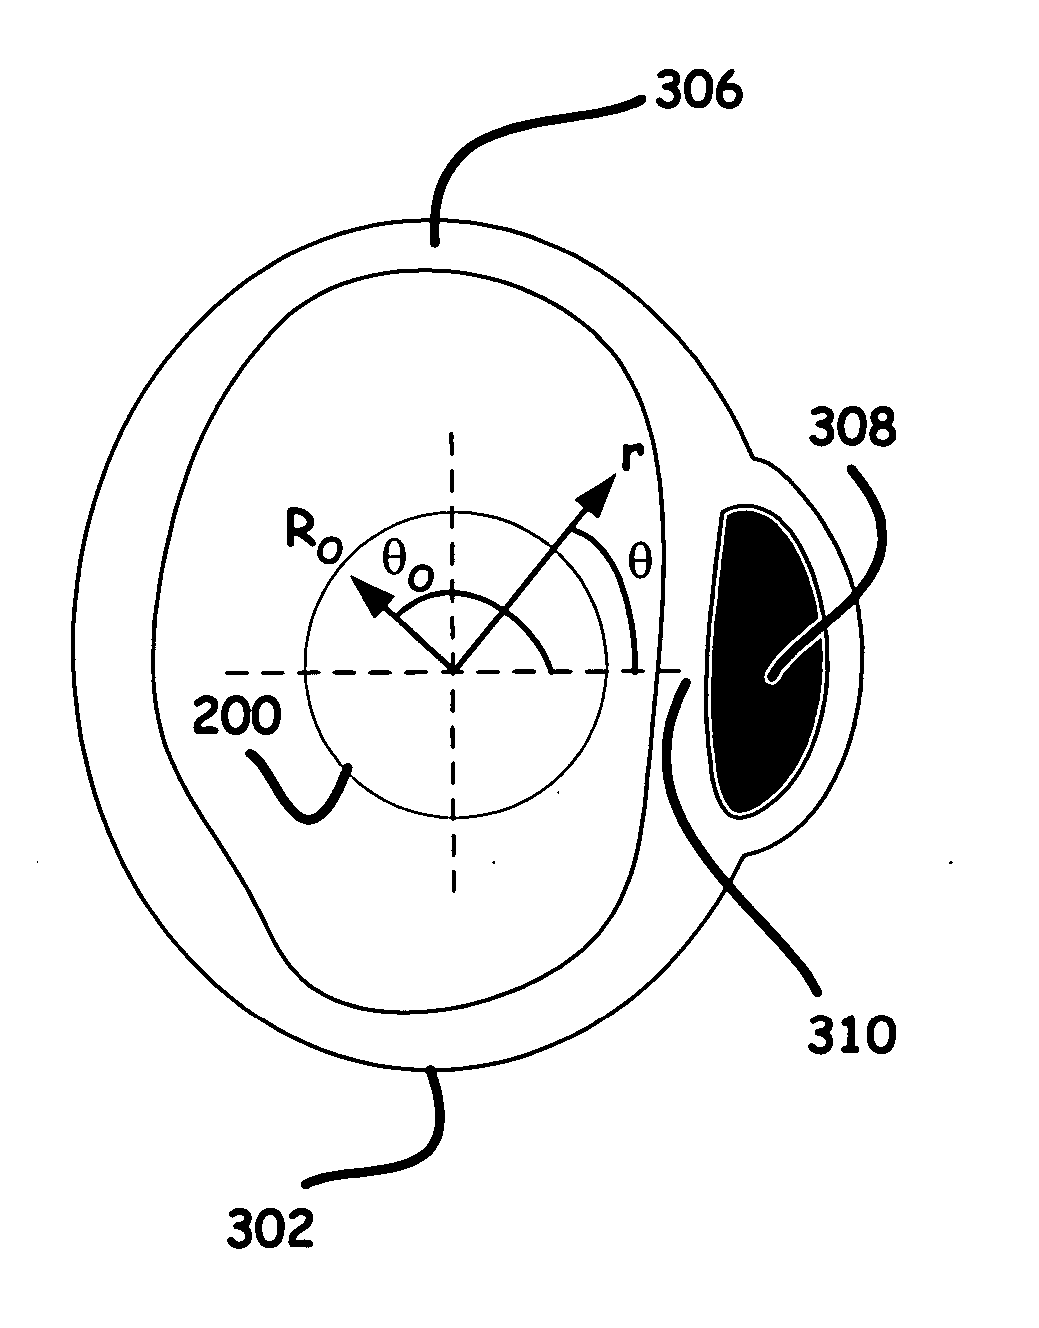 Radial reflection diffraction tomography